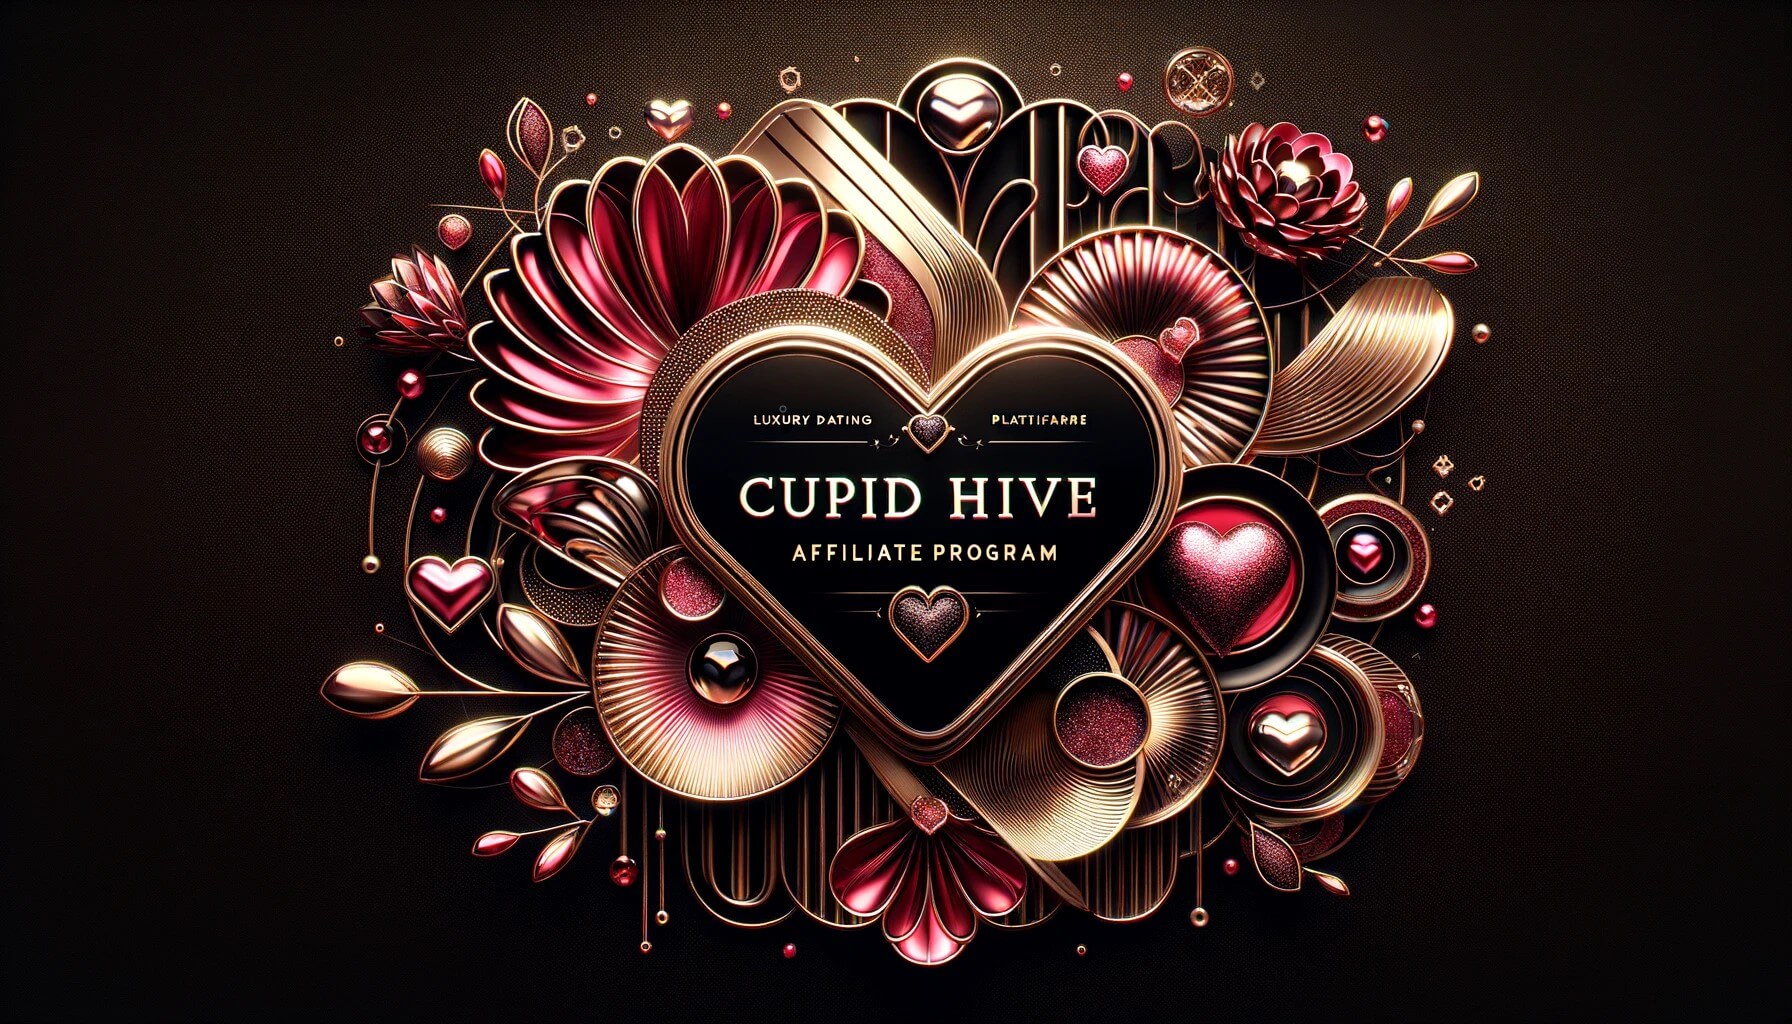 Join Cupid Hive’s Exclusive Dating Service Affiliate Program and Capitalize on Luxury Matchmaking